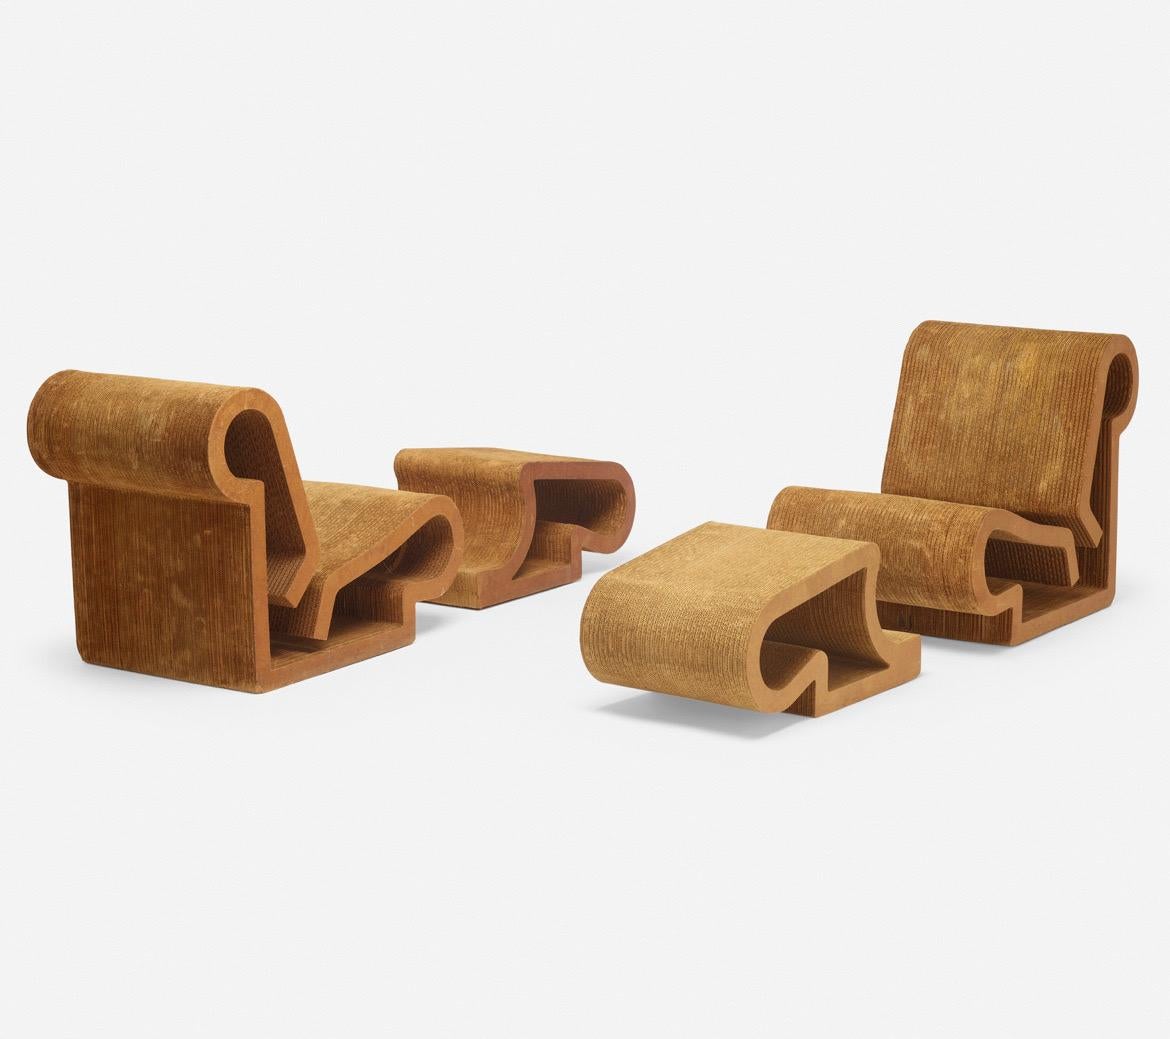 Frank Gehry pair of easy Edges chairs and ottomans. Easy Edges, Inc. Canada/USA, 1972. Laminated cardboard, masonite. Chair: 29¼ H × 23¼ W × 39 D in, ottoman: 14¾ H × 17¾ W × 30 D in (37
Applied paper manufacturer's label to underside of one ottoman